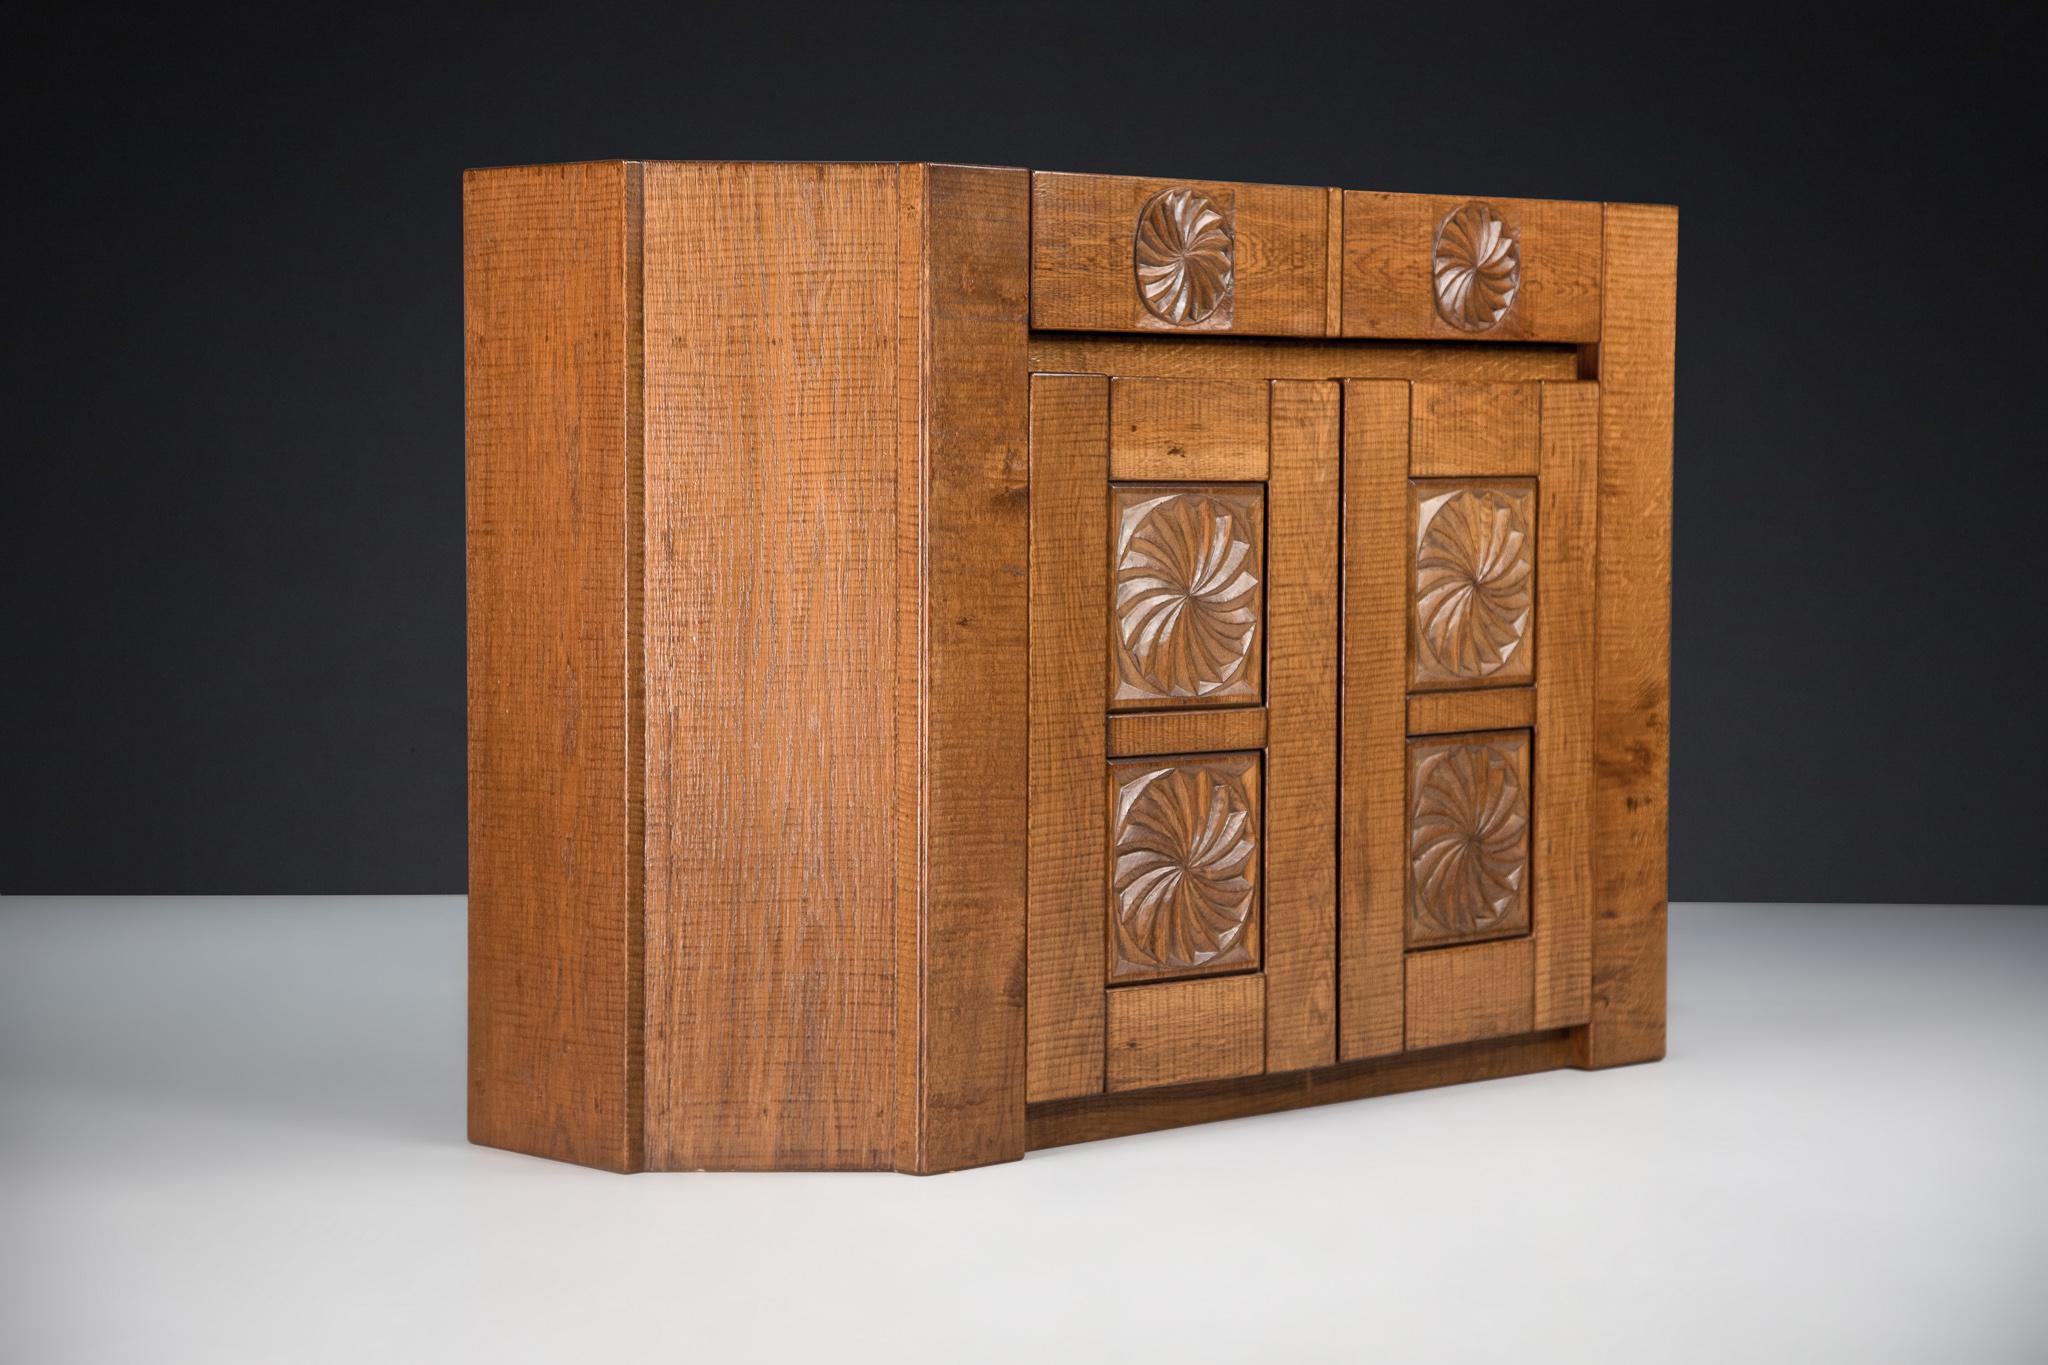 Hand crafted Brutalist Giuseppe Rivadossi sideboard in oak Italy, the 1970s.

A fantastic oak sideboard by the Italian sculptor and designer Giuseppe Rivadossi featured a high level of craftsmanship in woodwork. This sideboard featured contains a